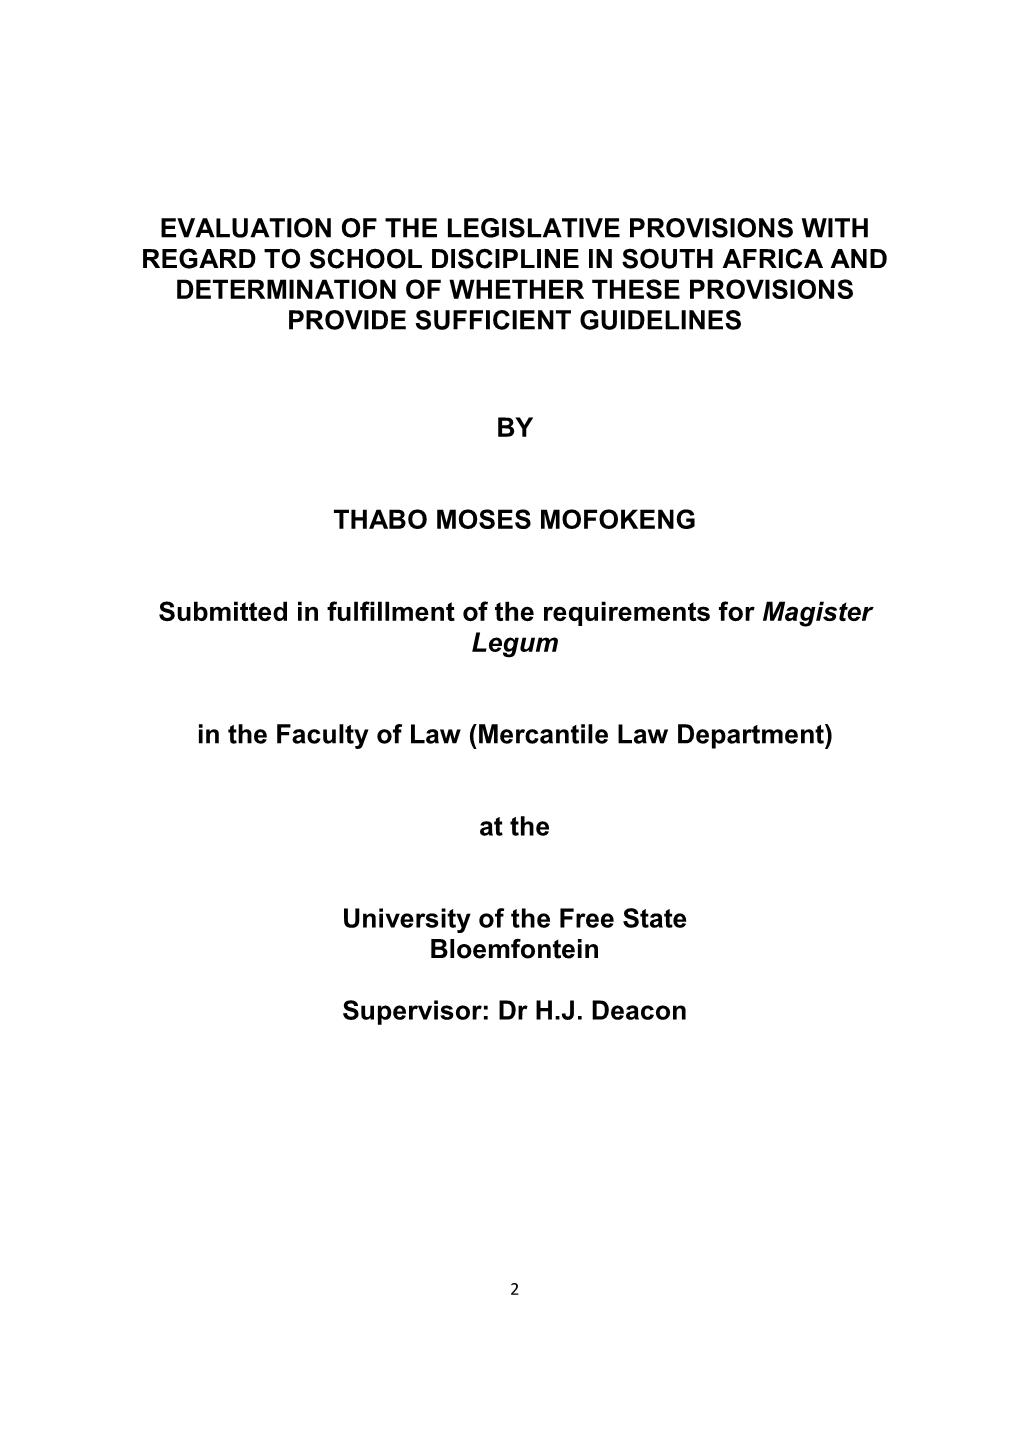 Evaluation of the Legislative Provisions with Regard to School Discipline in South Africa and Determination of Whether These Provisions Provide Sufficient Guidelines